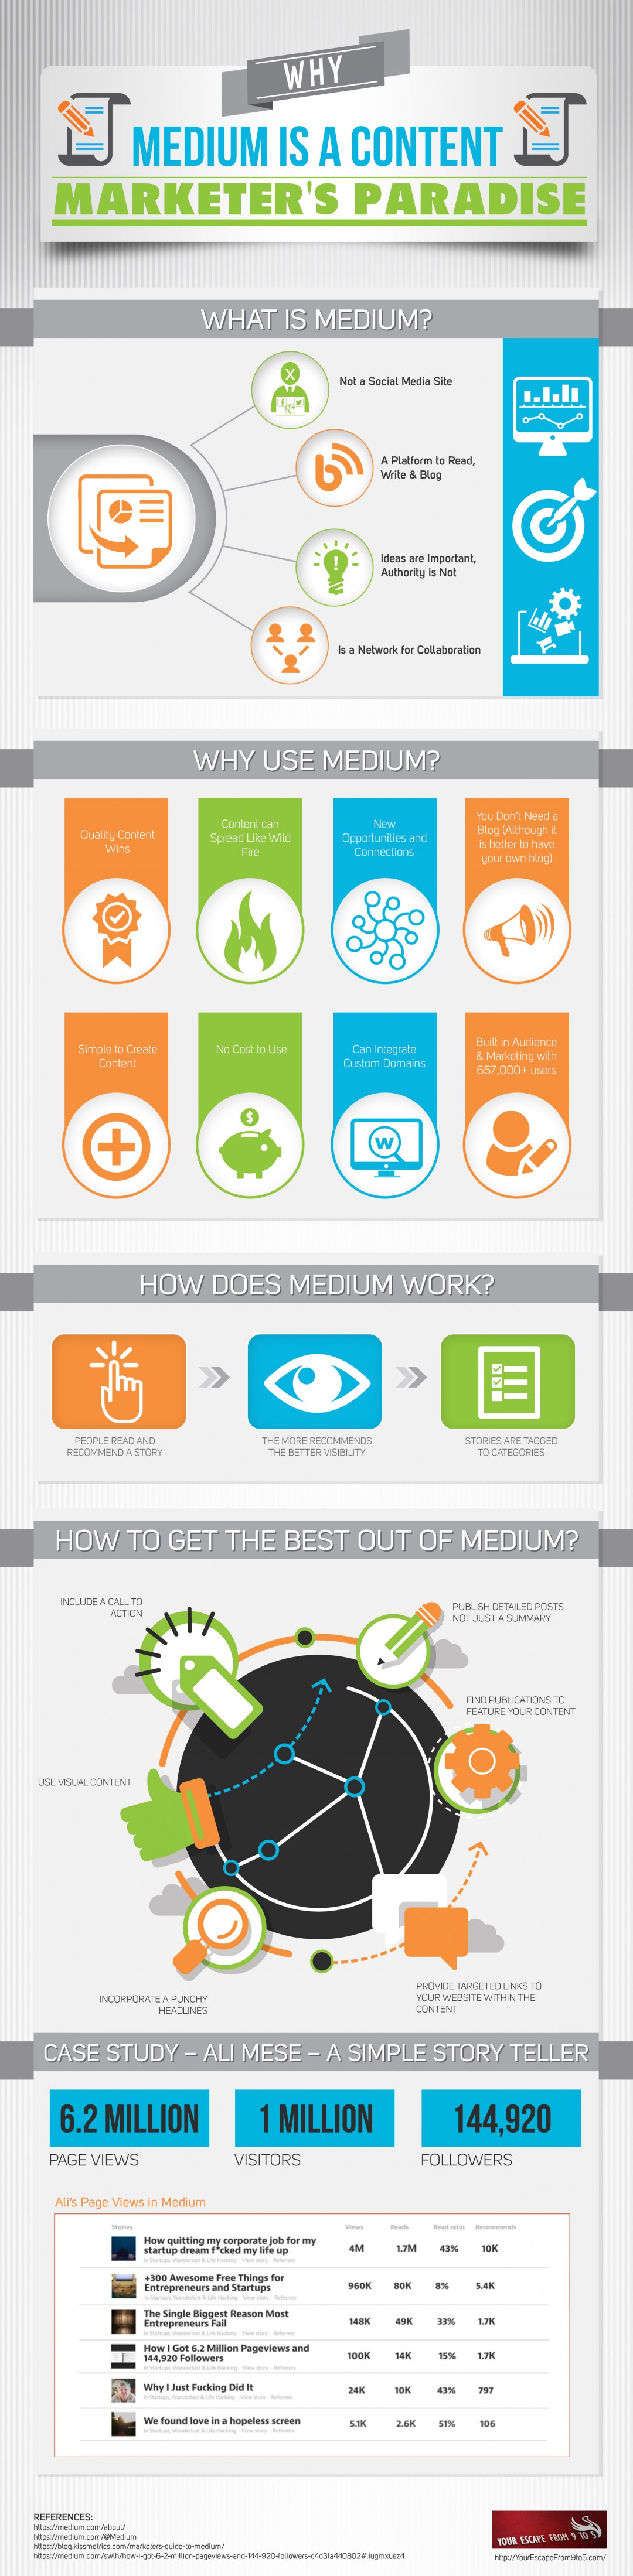 wersm-why-medium-is-a-content-marketers-paradise-img